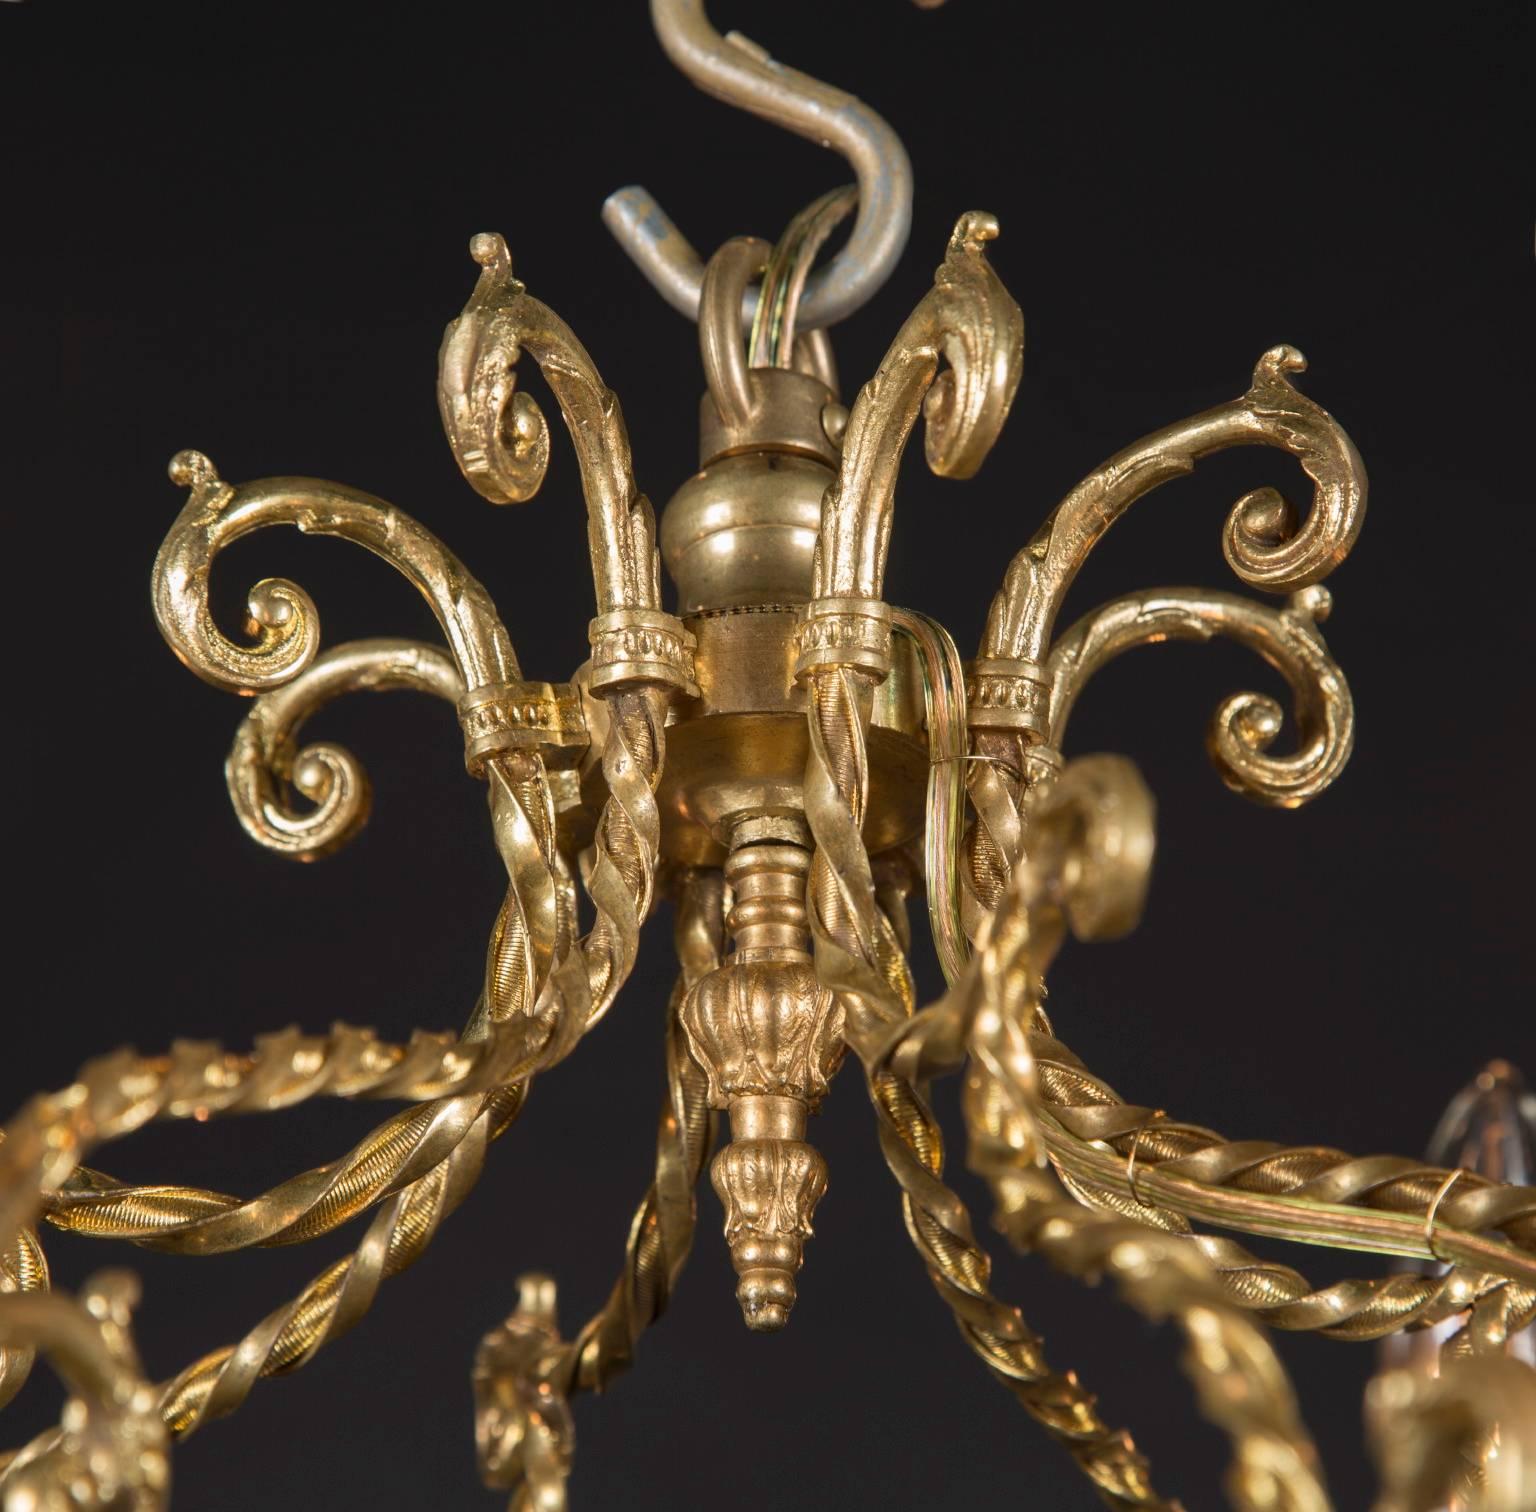 This French antique Louis XVI chandelier features bronze d'ore (gold plated bronze) and a unique scroll motif. The piece dates back to the Mid-19th century and was hand crafted before the era of industrialization. The piece sports candle cups on